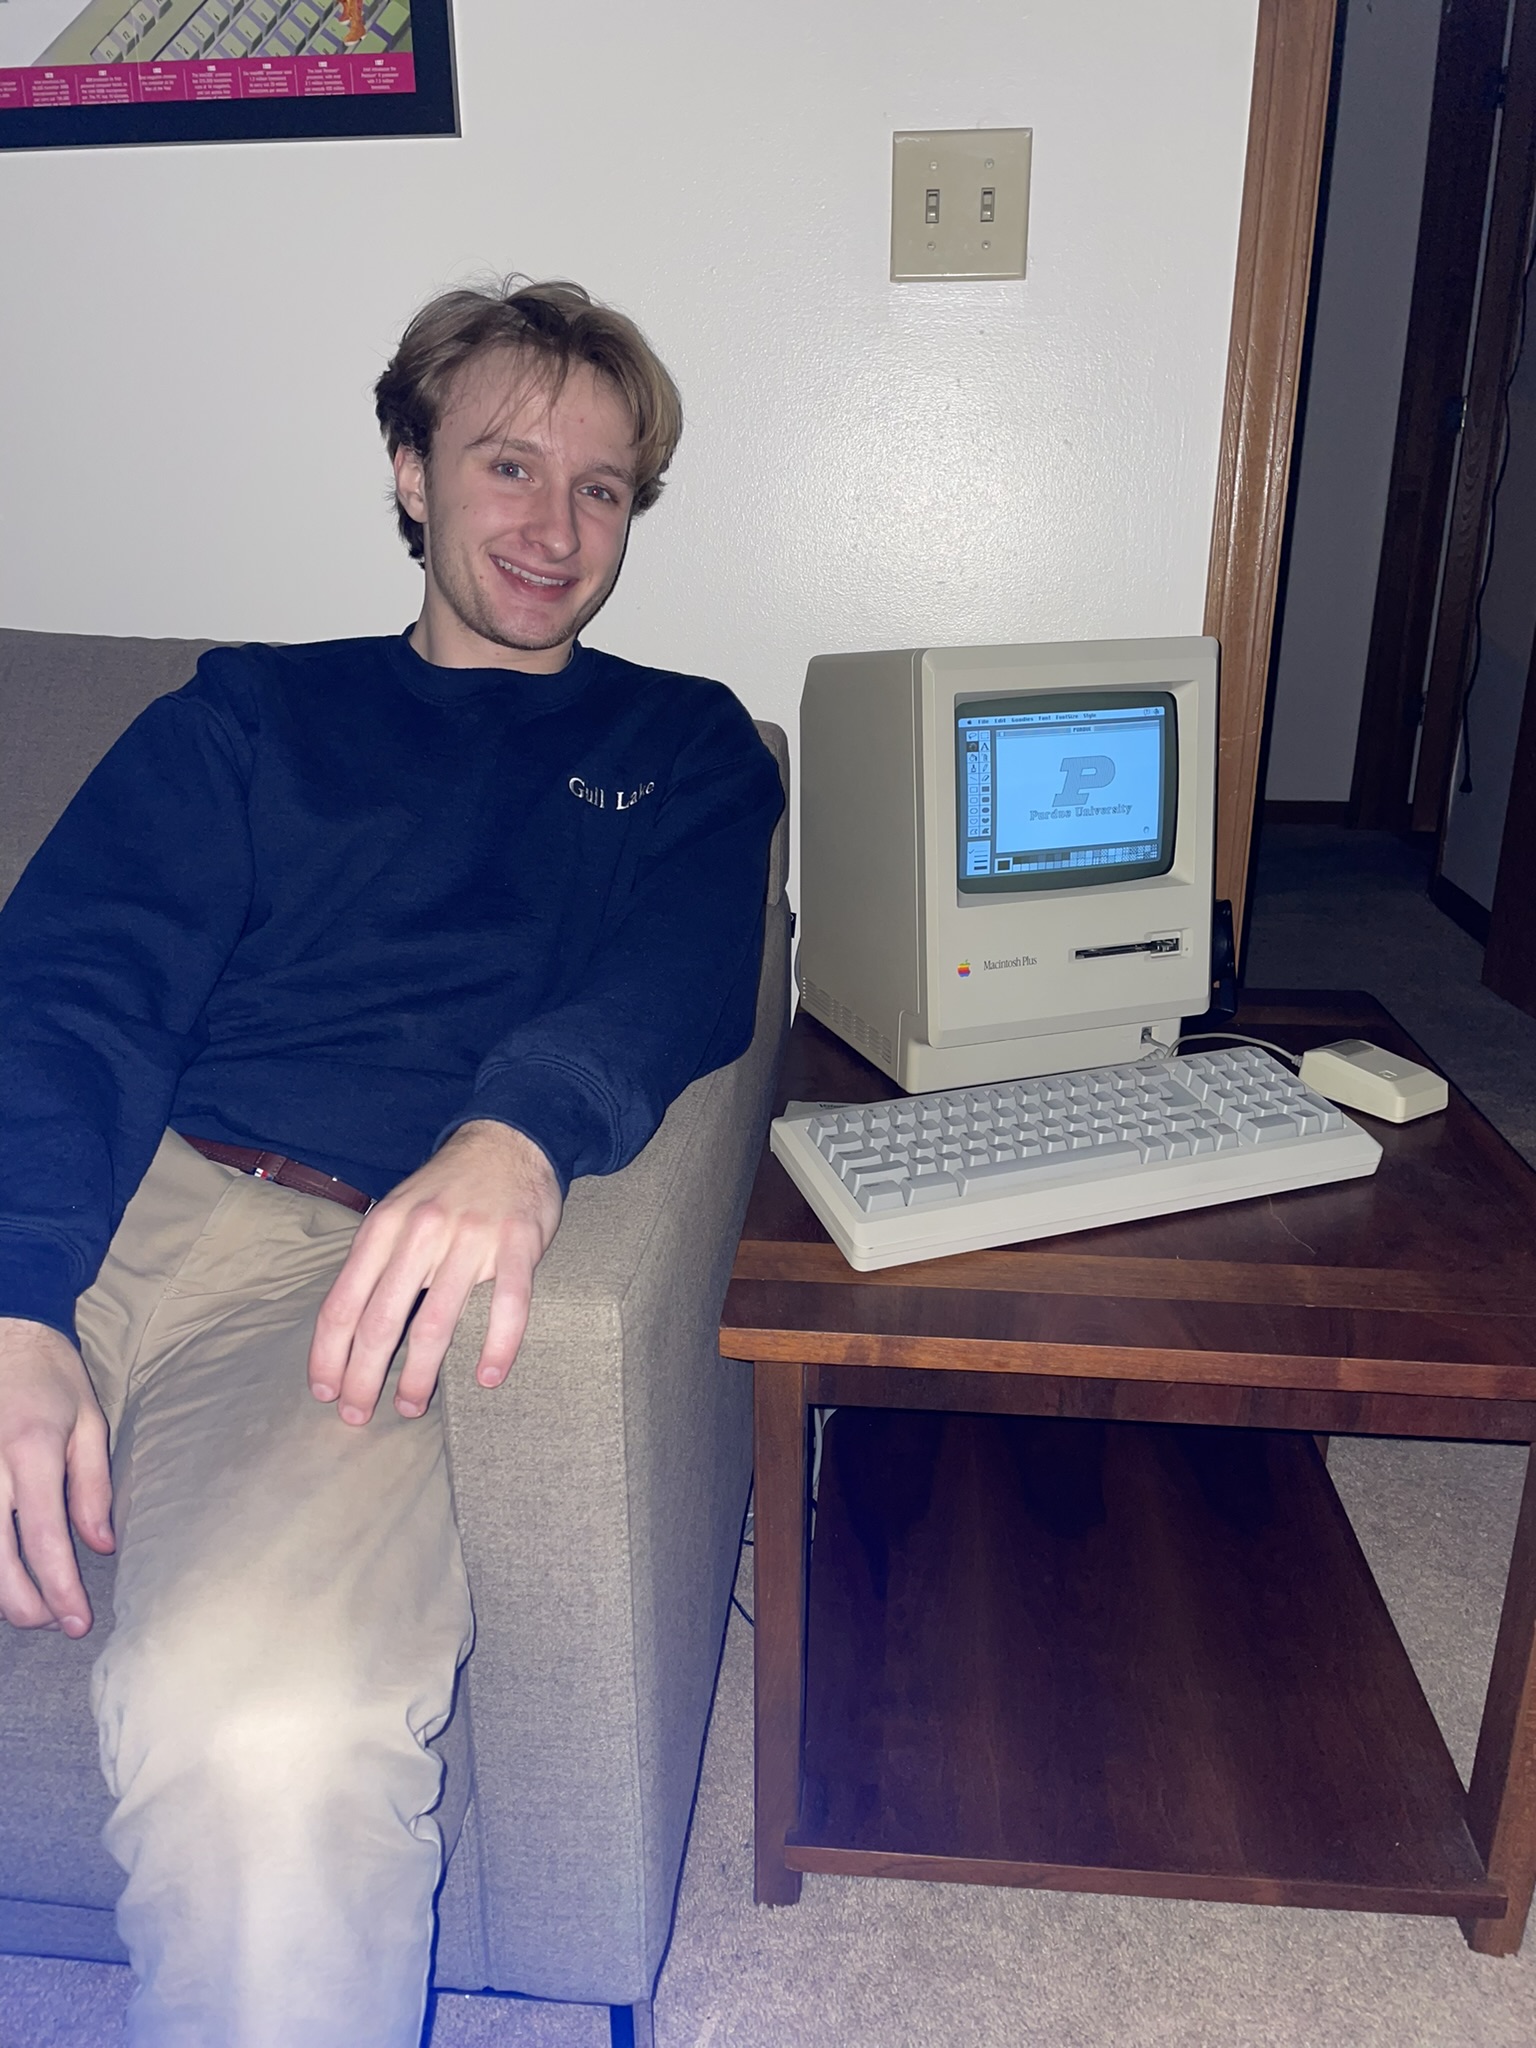 image of me with a macintosh plus